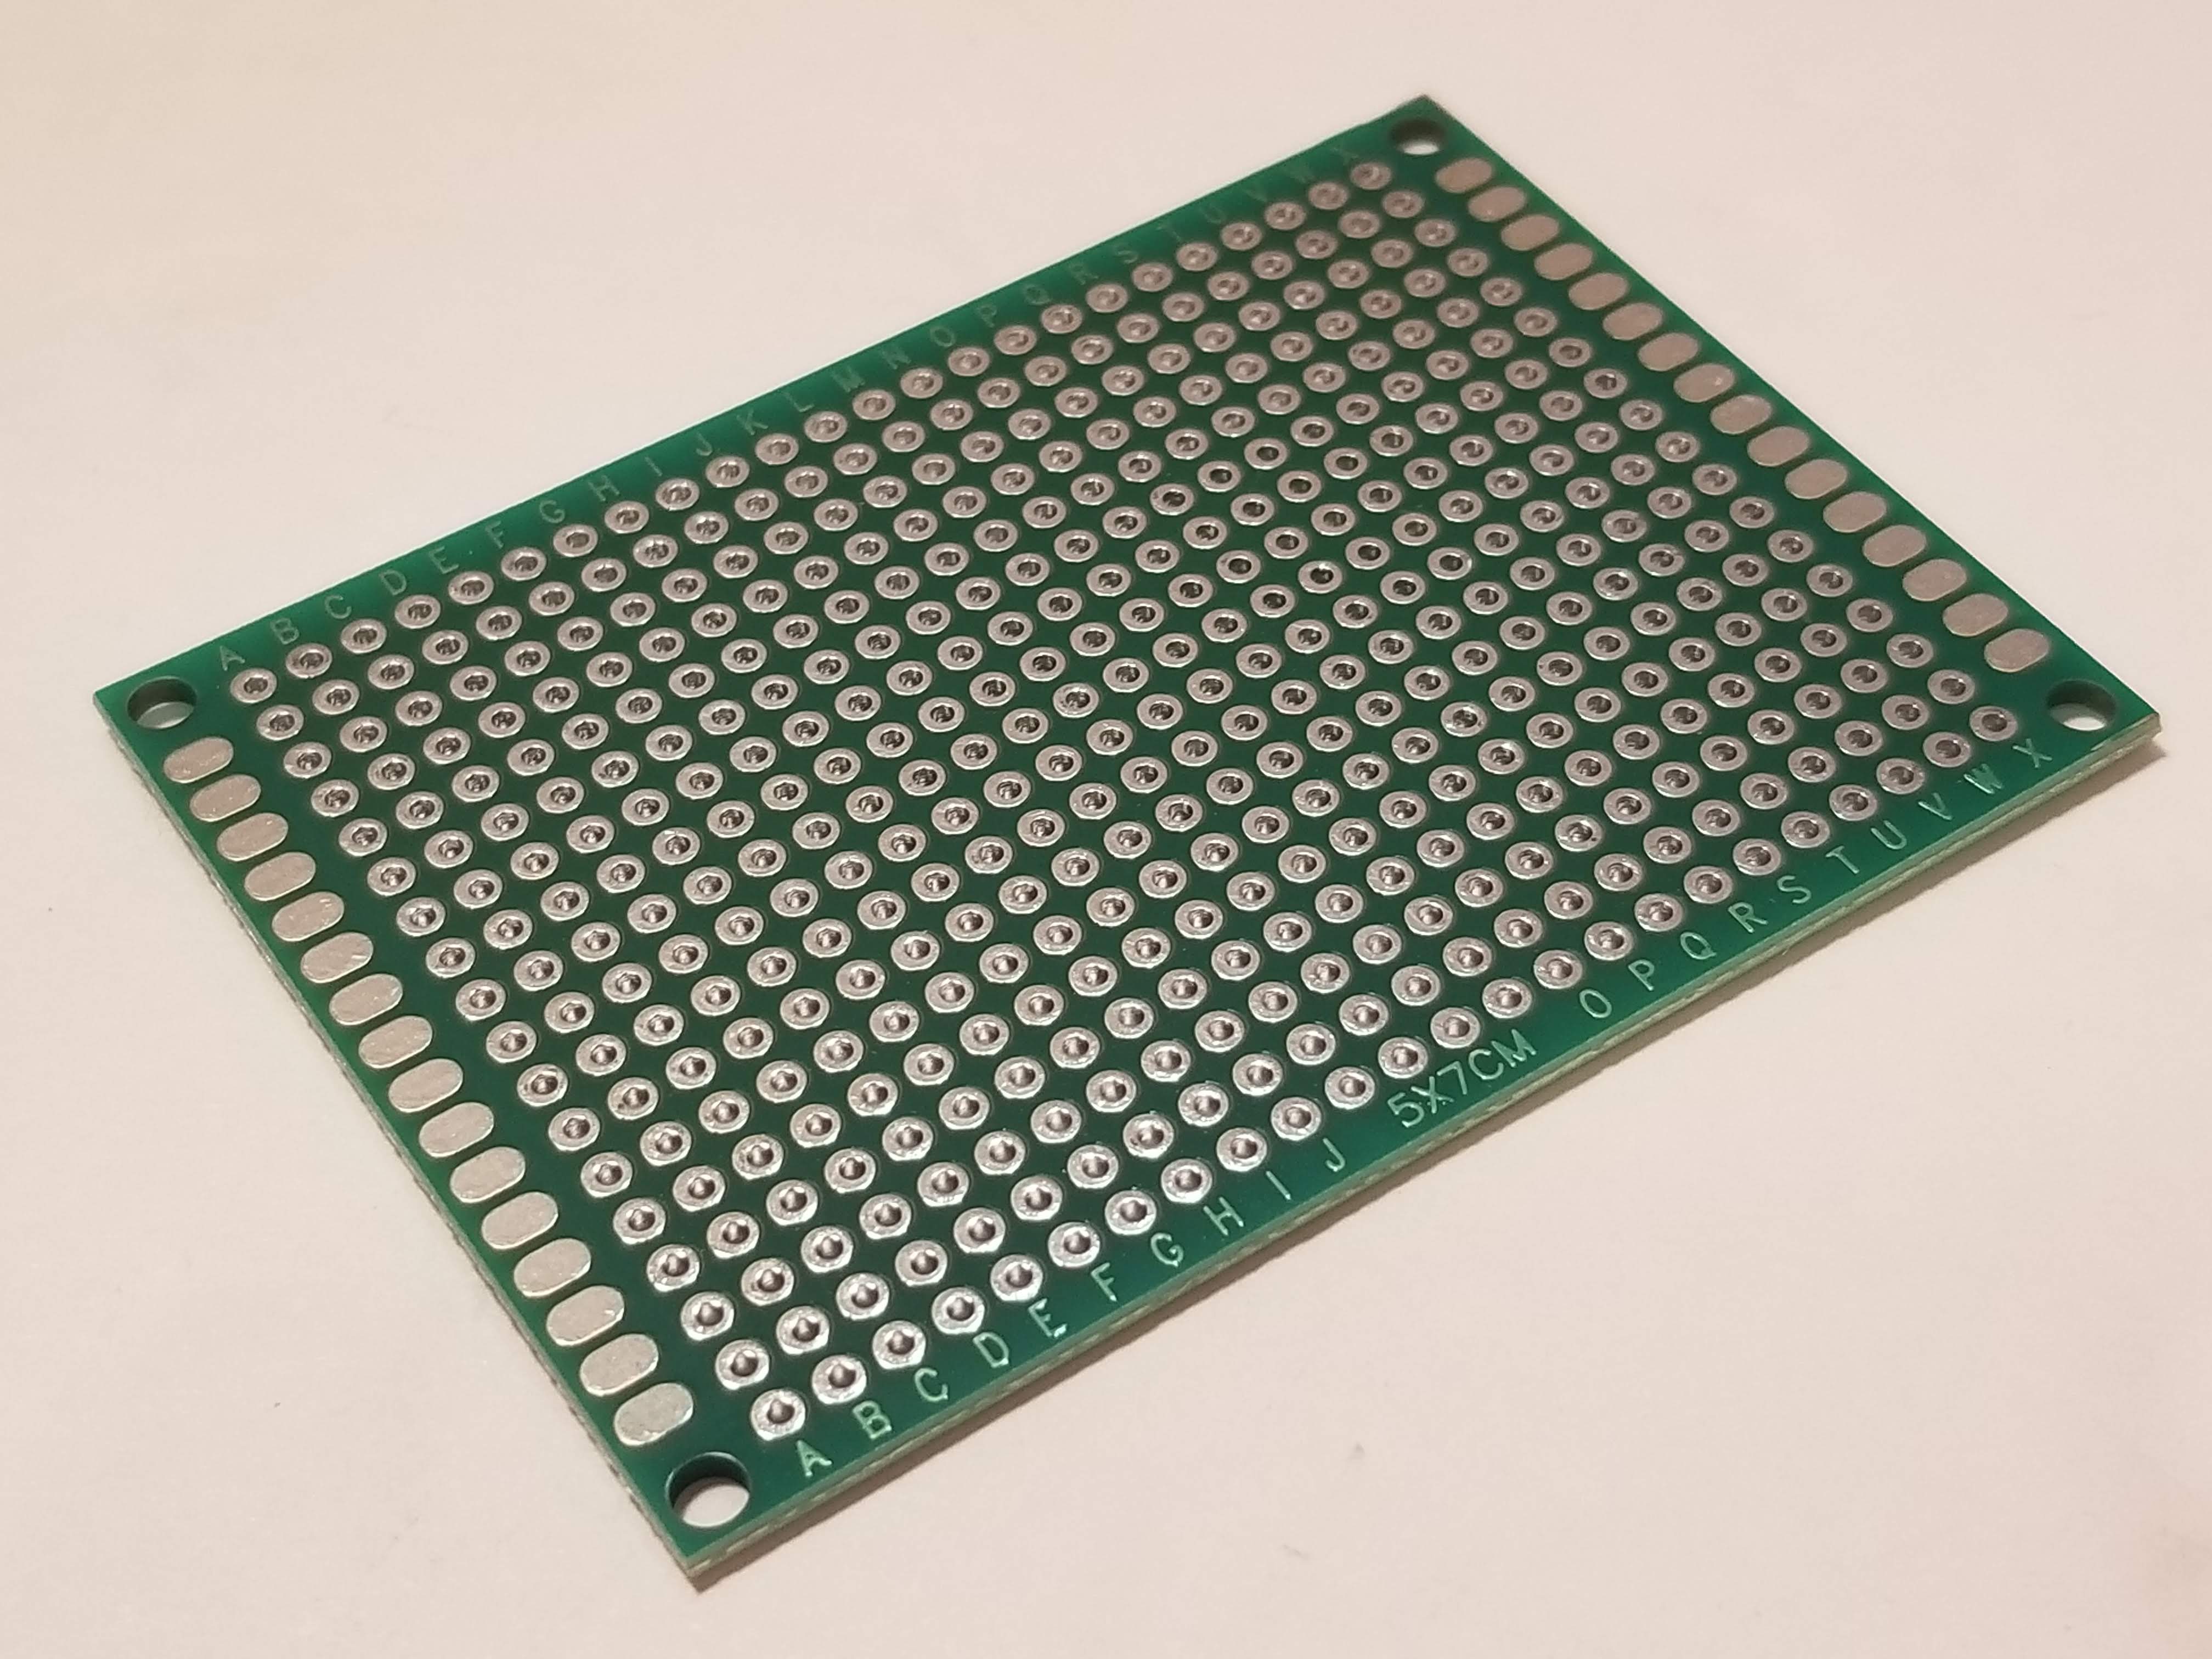 Picture of Prototyping Board 5X7cm